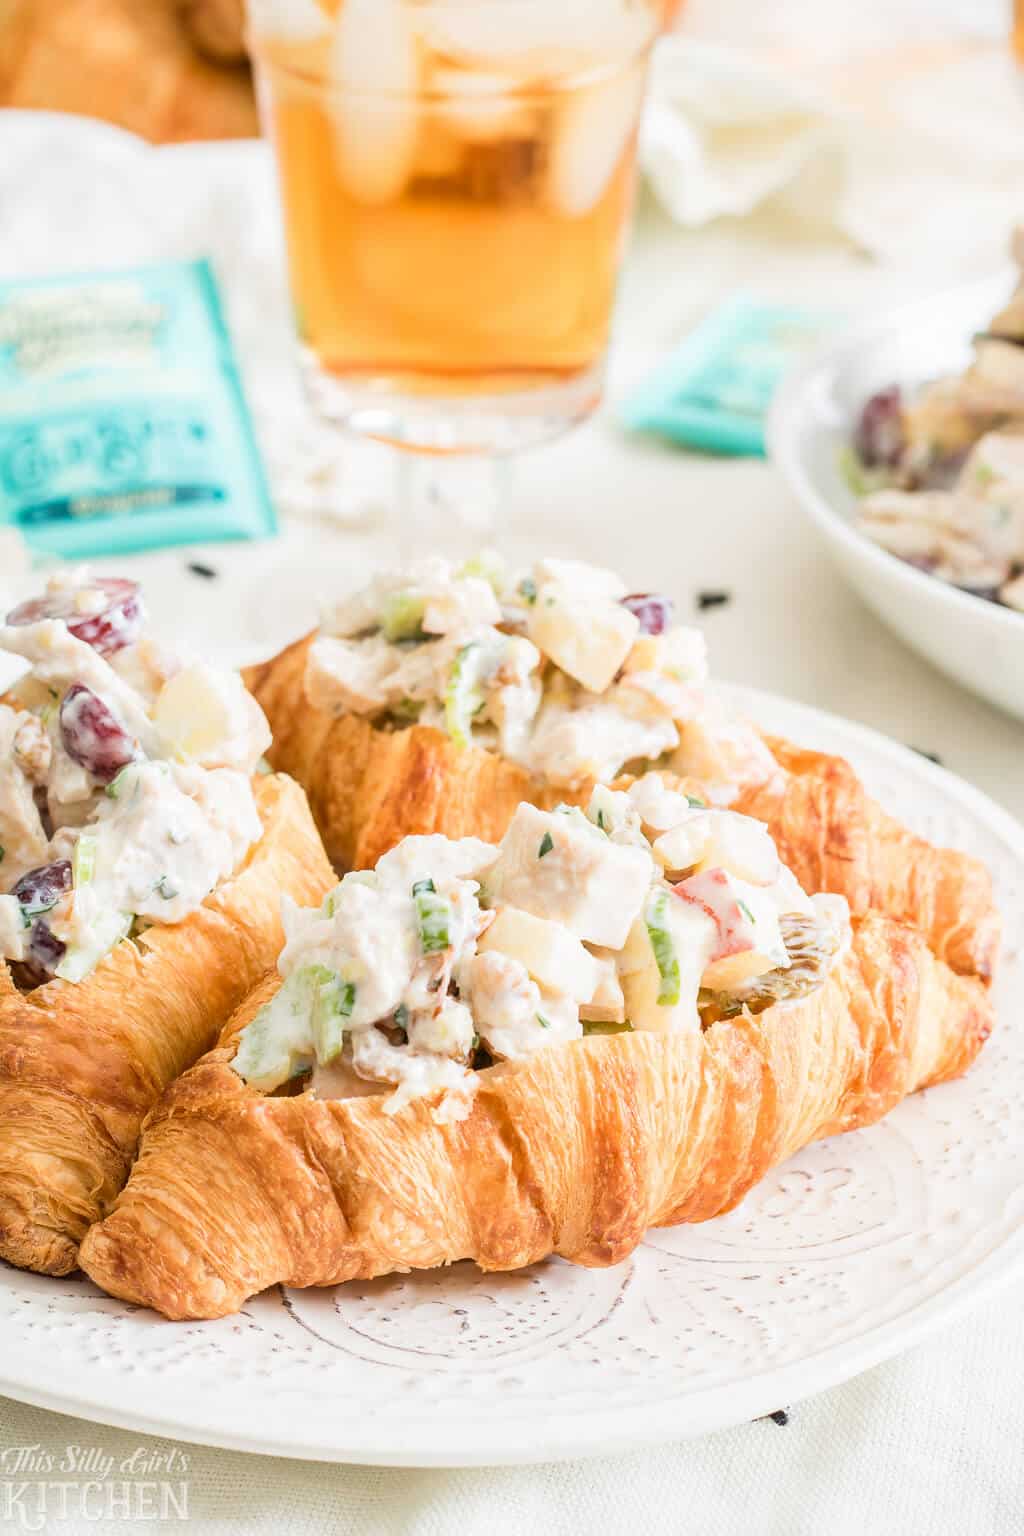 Waldorf Chicken Salad, rotisserie chicken and crisp fruits tossed with a tangy pineapple yogurt dressing! #Recipe from ThisSillyGirlsKitchen.com #chickensalad @waldorfsalad #salad